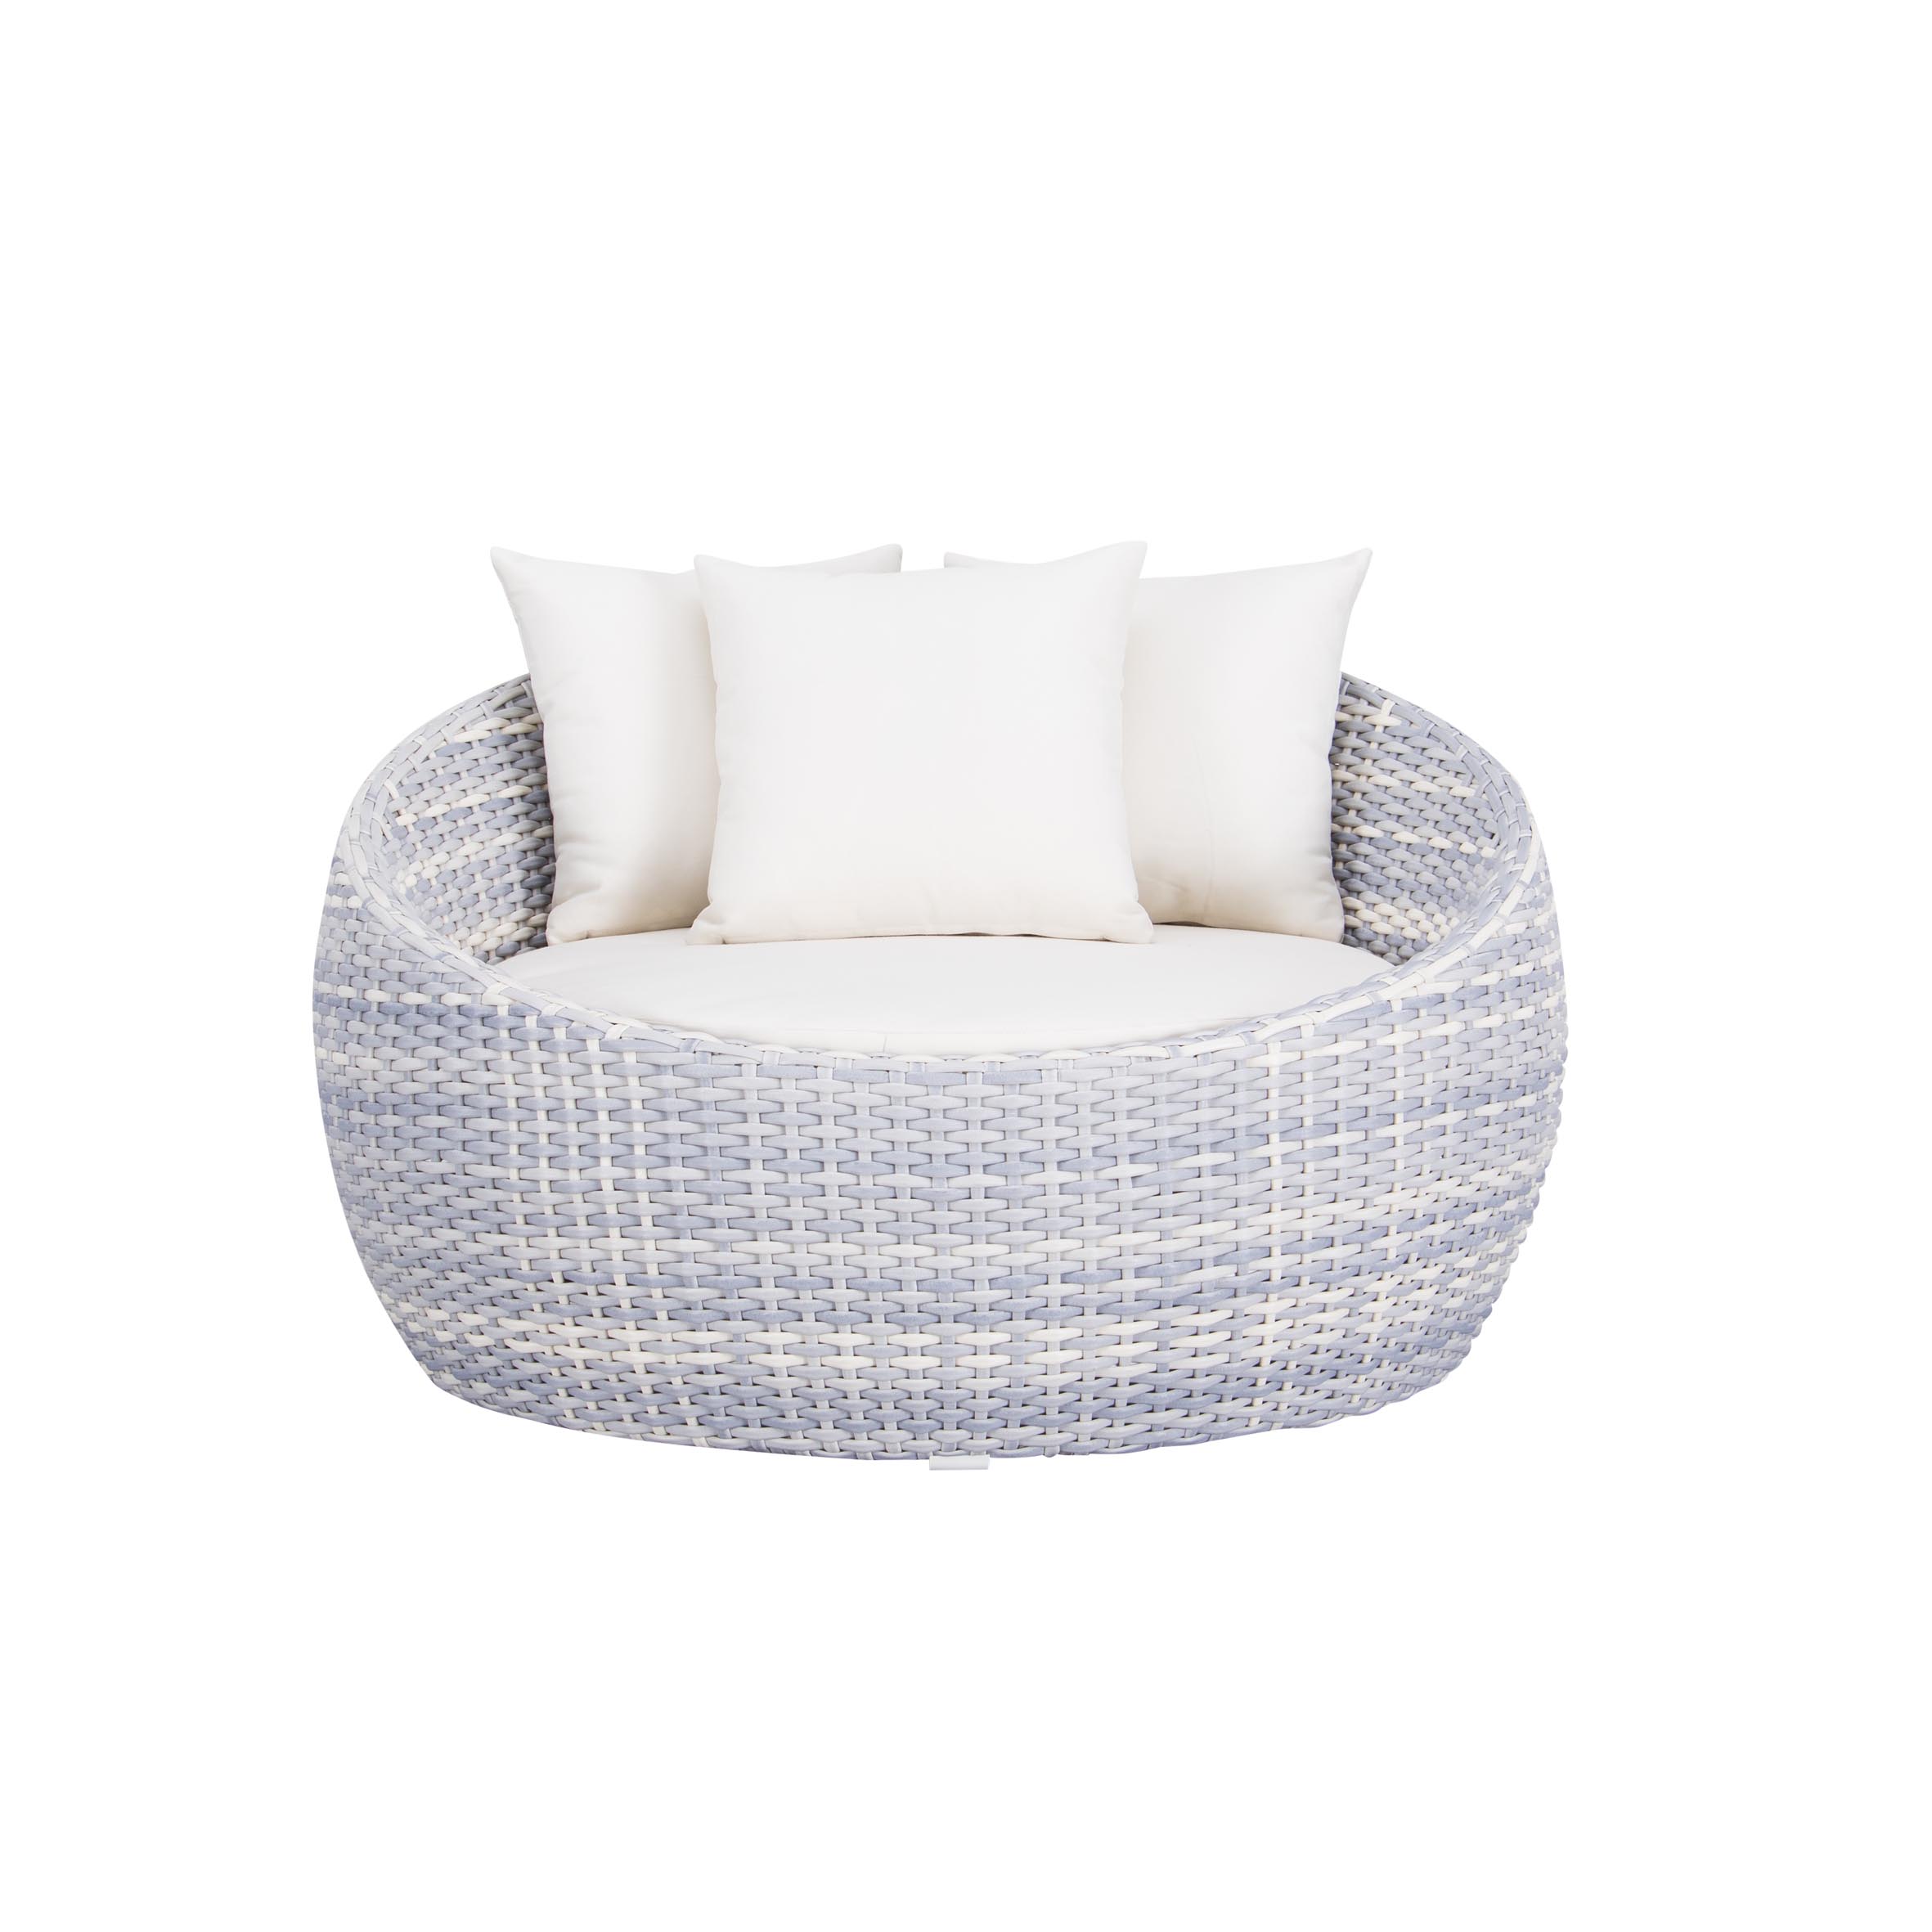 Sky rattan round daybed S4